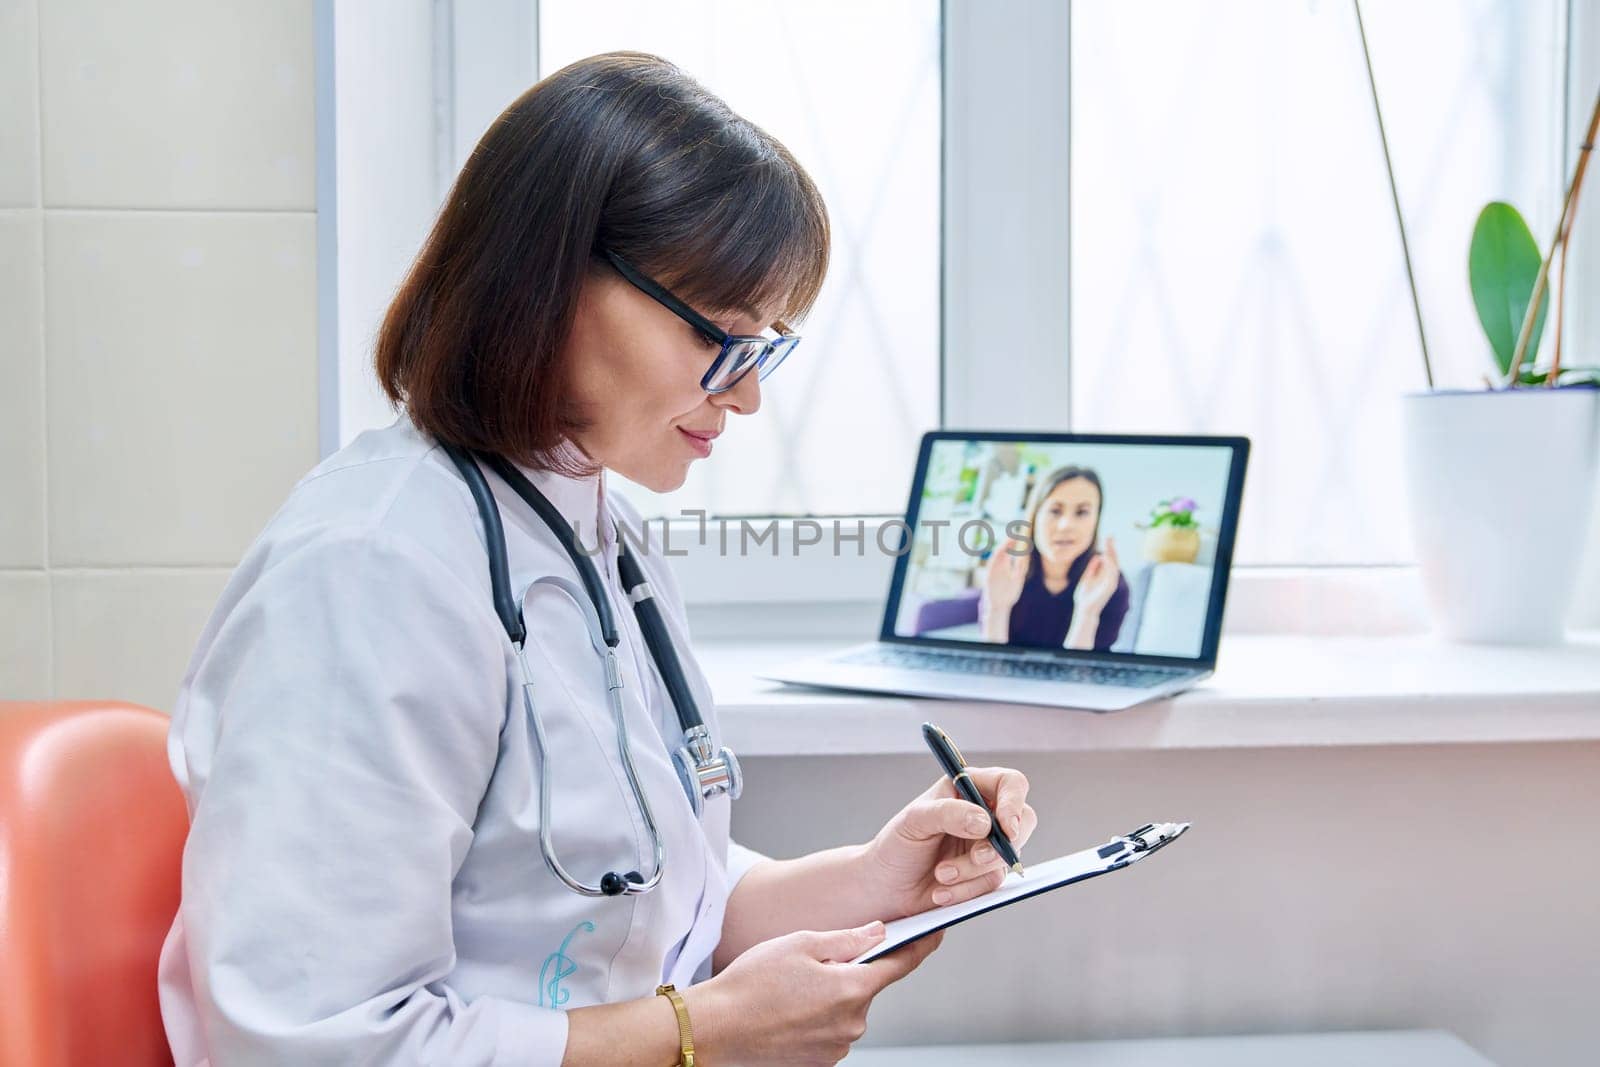 General practitioner doctor talking on videoconference with female patient making notes on file holder. Video call on laptop, online virtual help, remote medical consultation. Medicine technology